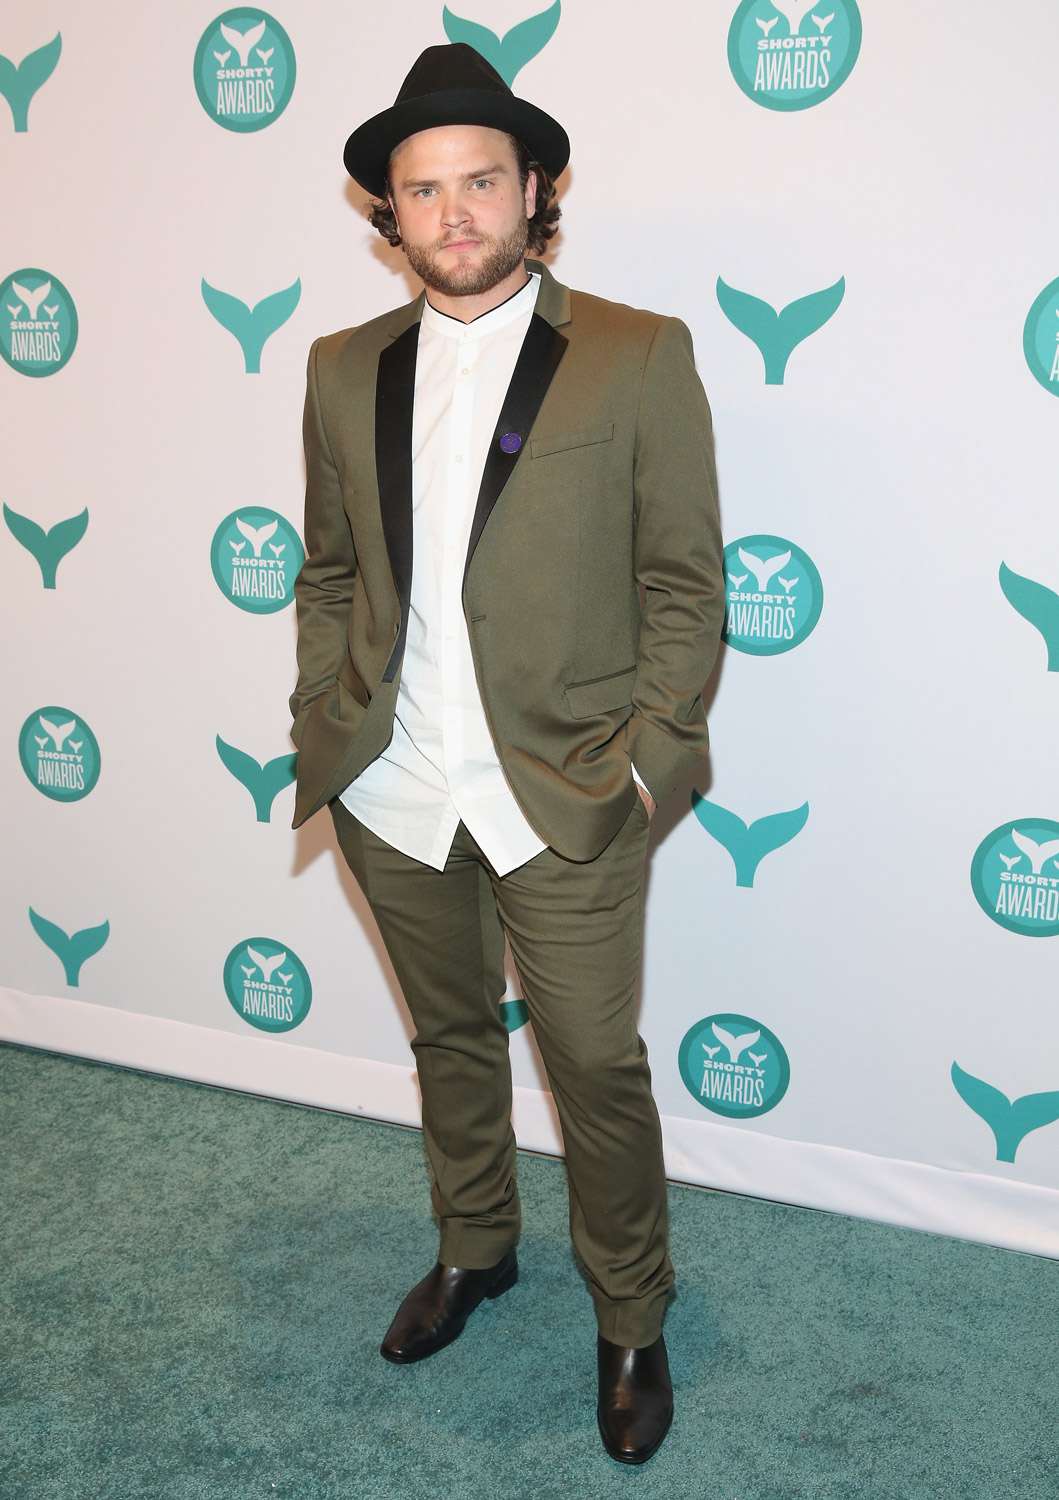  Viner J.Cyrus attends 8th Annual Shorty Awards Red Carpet And Awards Ceremony at The New York Times Center on April 11, 2016